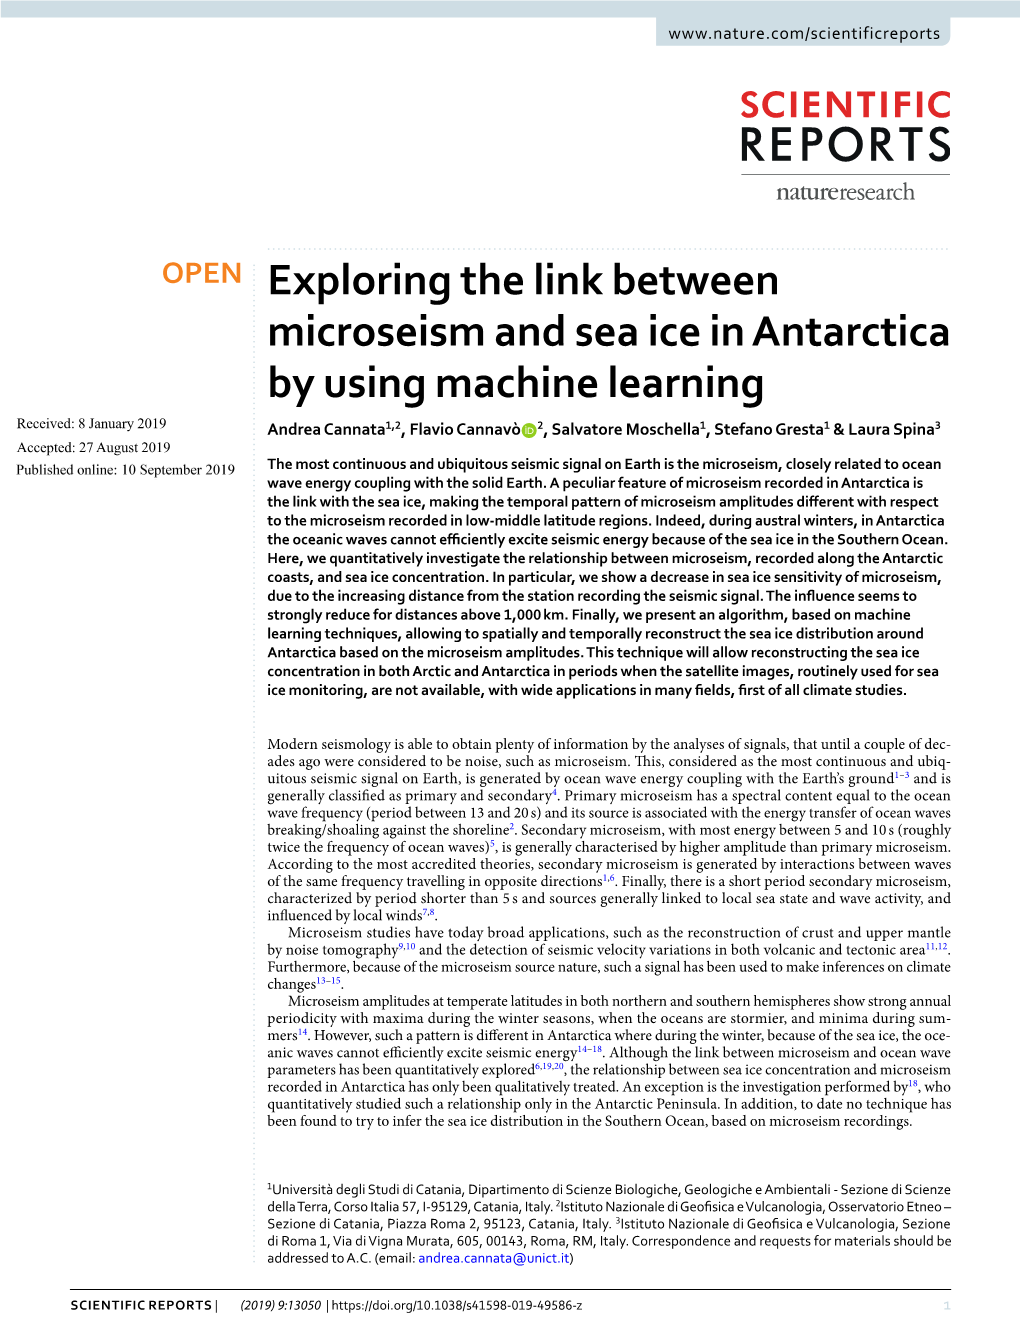 Exploring the Link Between Microseism and Sea Ice in Antarctica by Using